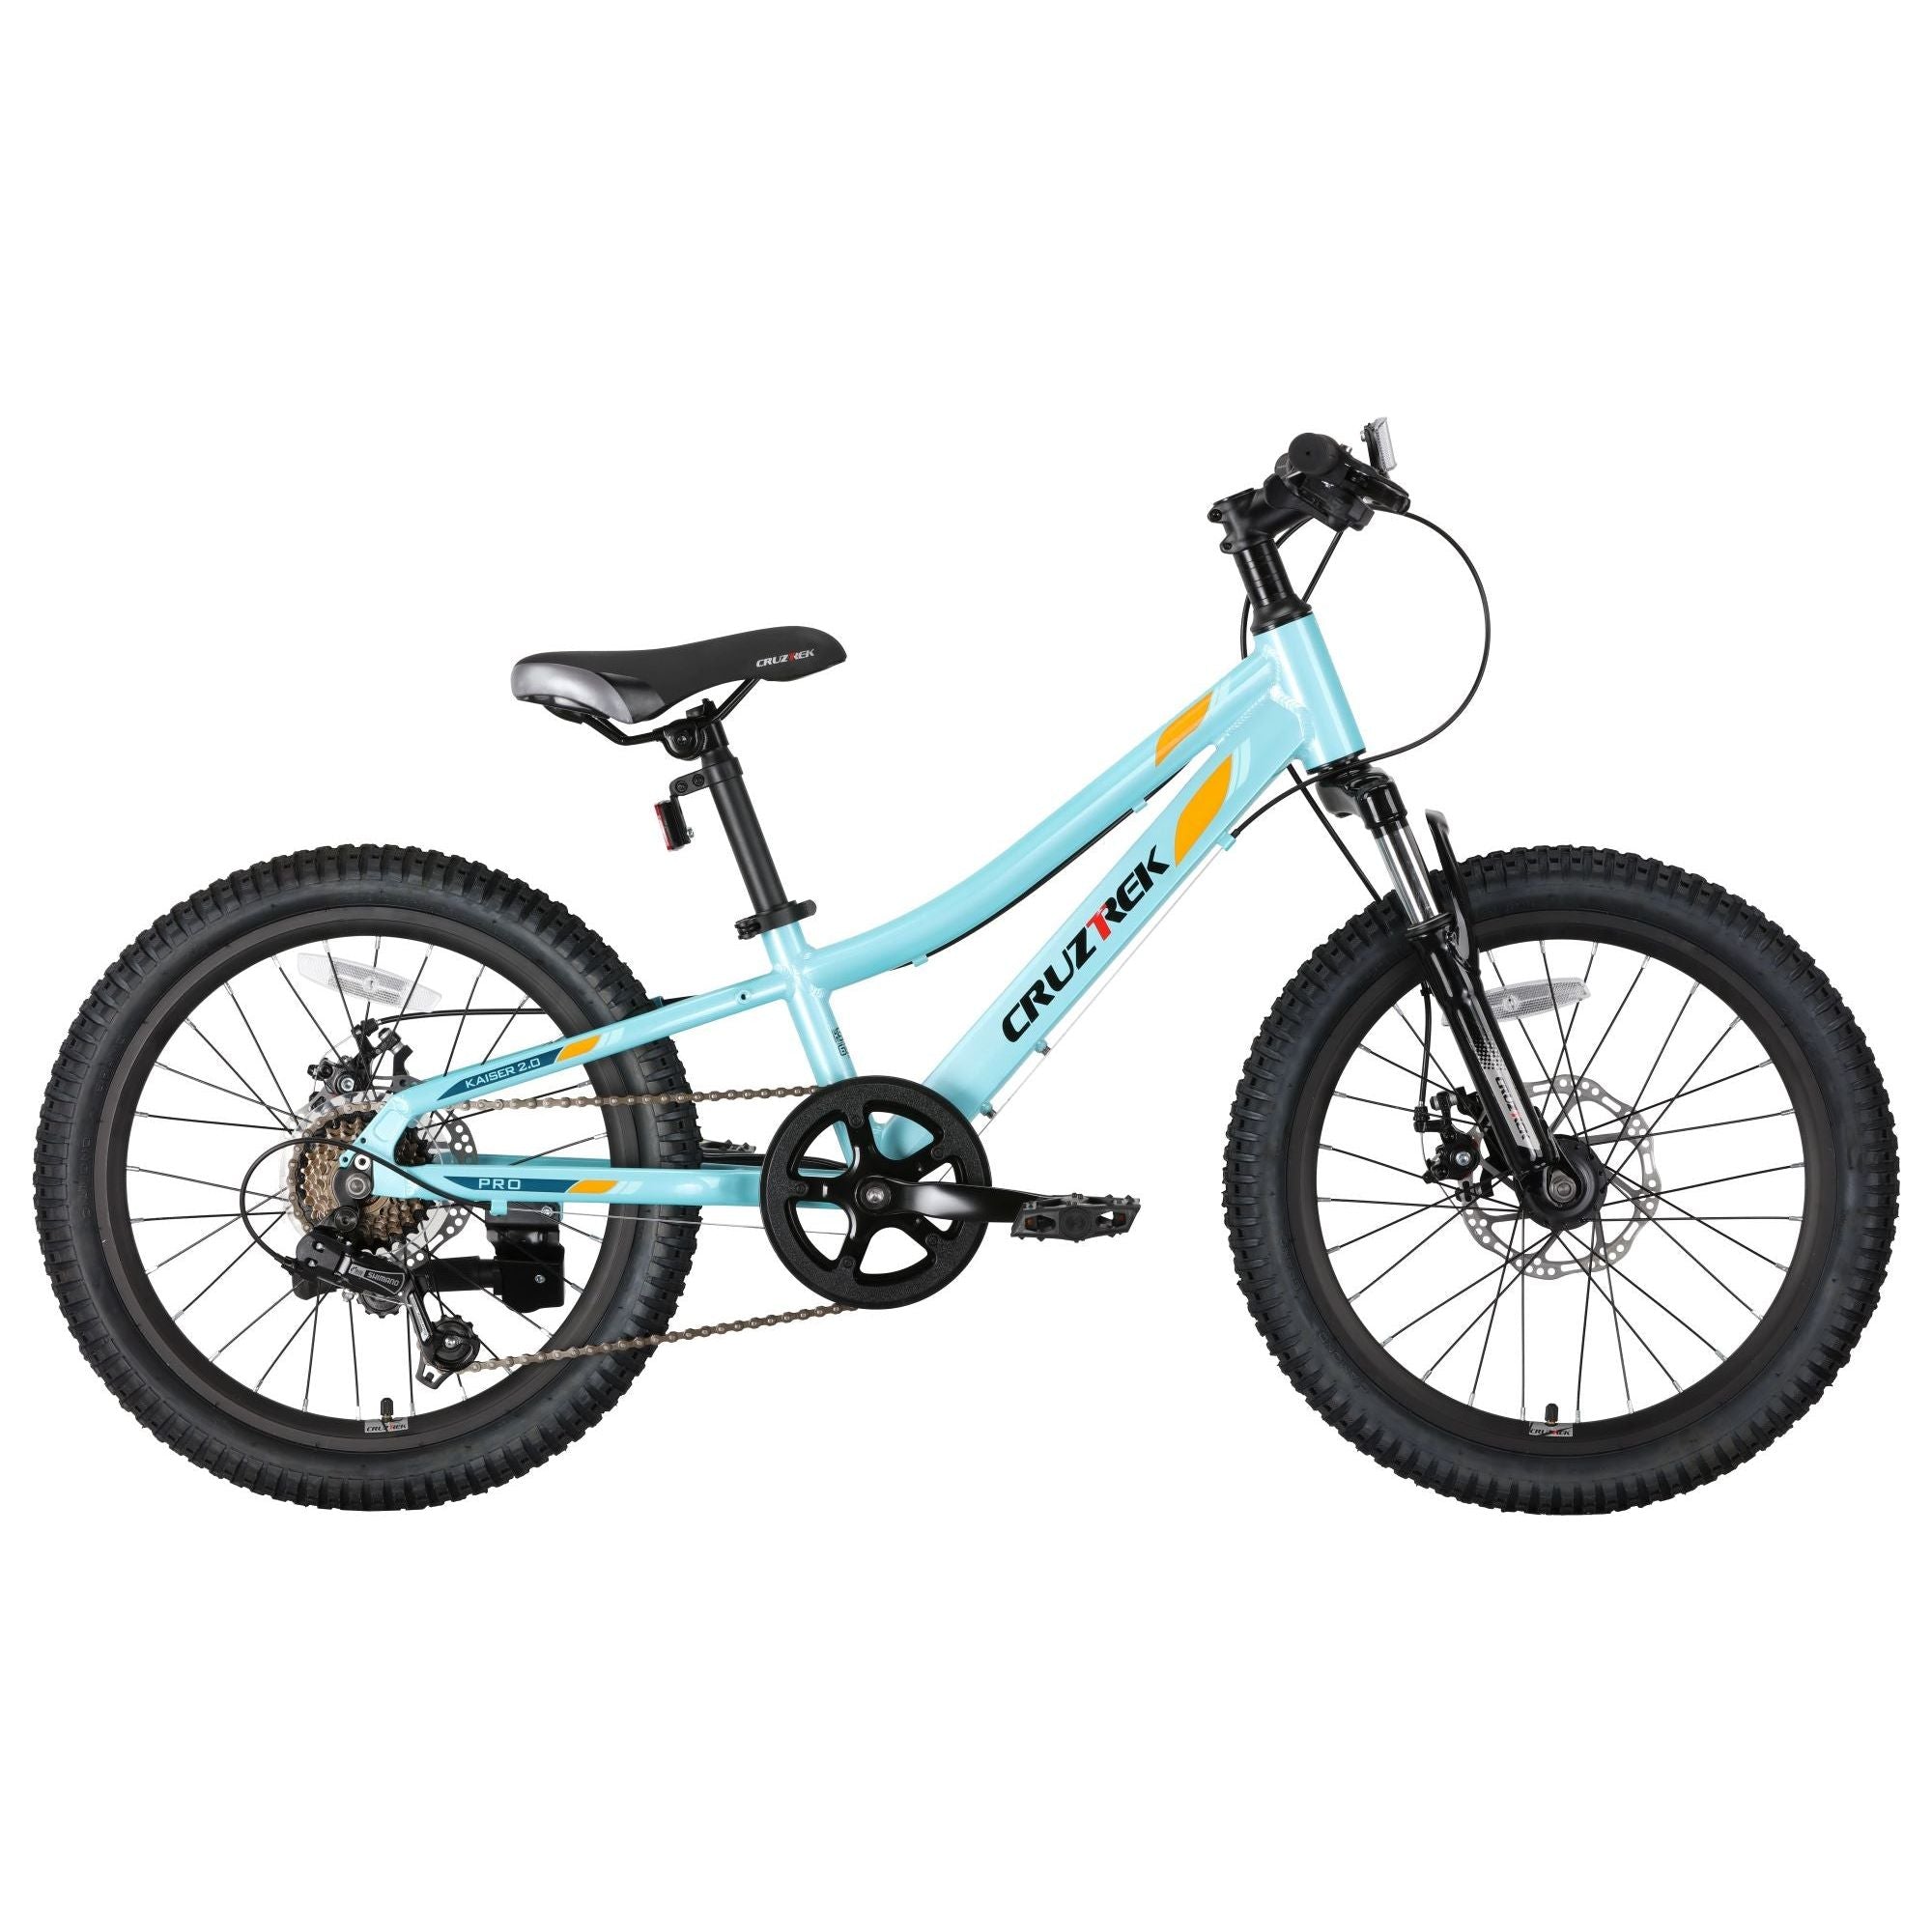 CRUZTREK 6061 Aluminum Alloy Special-Shaped Tubes Junior Bike Frame LTWOO SL-V4007 R 7SP with Gear and Disc Age- 7 Years to 11 Years